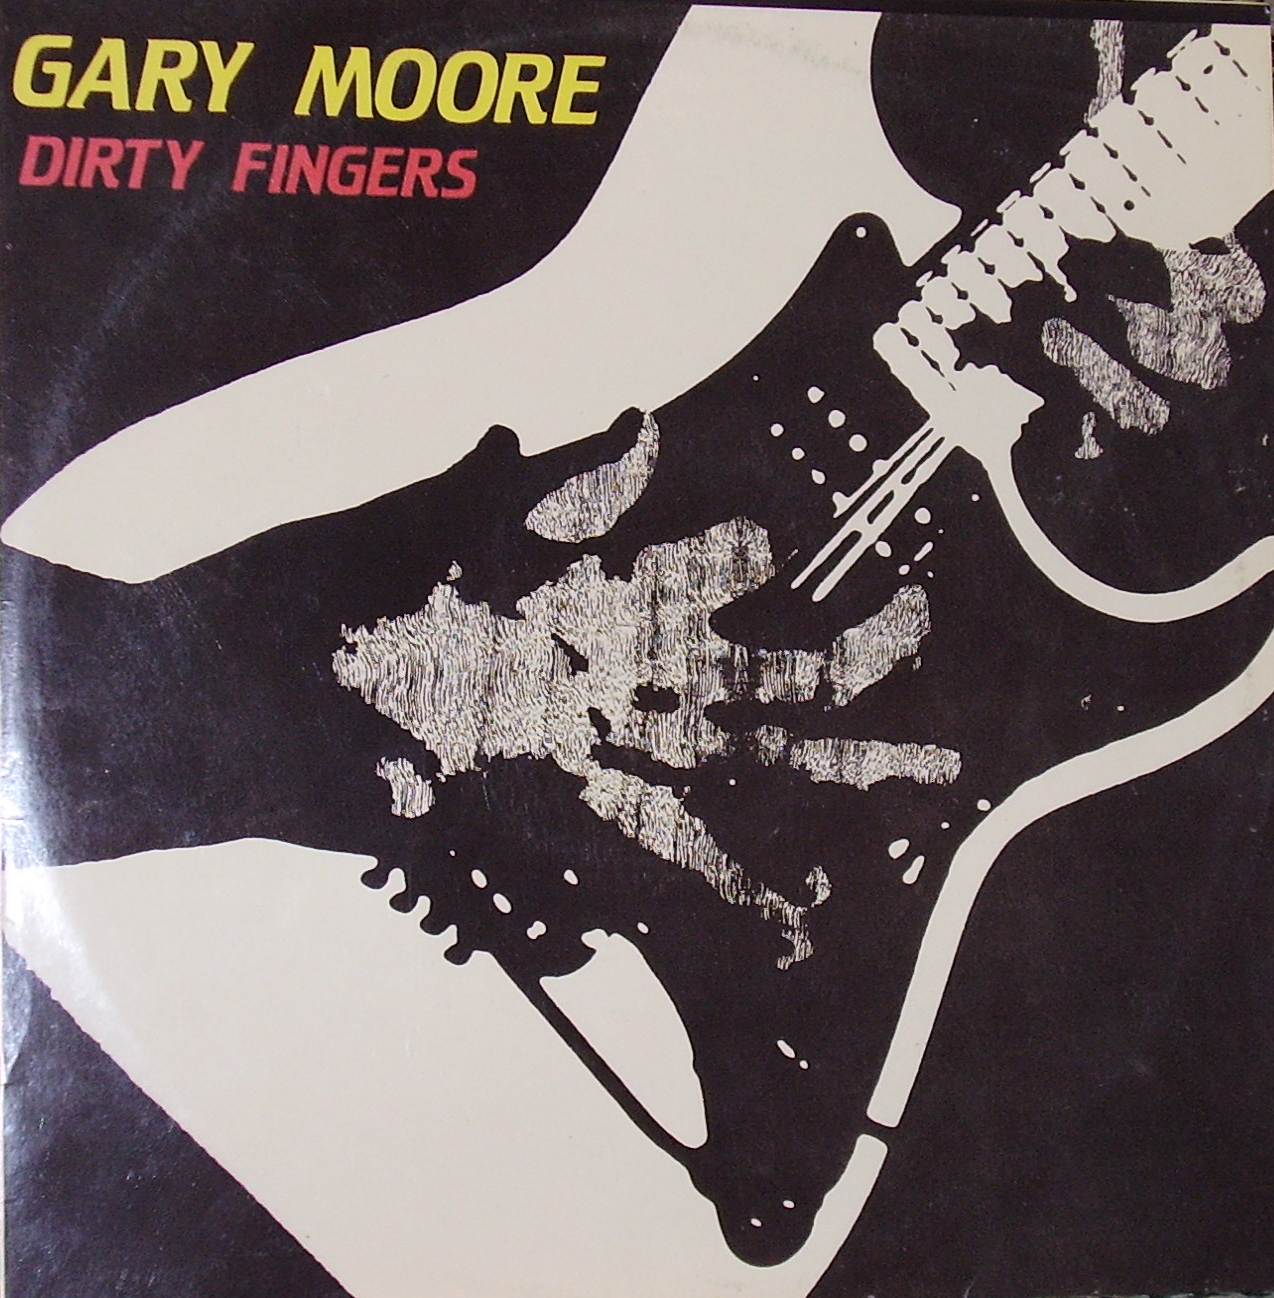 GARY MOORE. Dirty Fingers